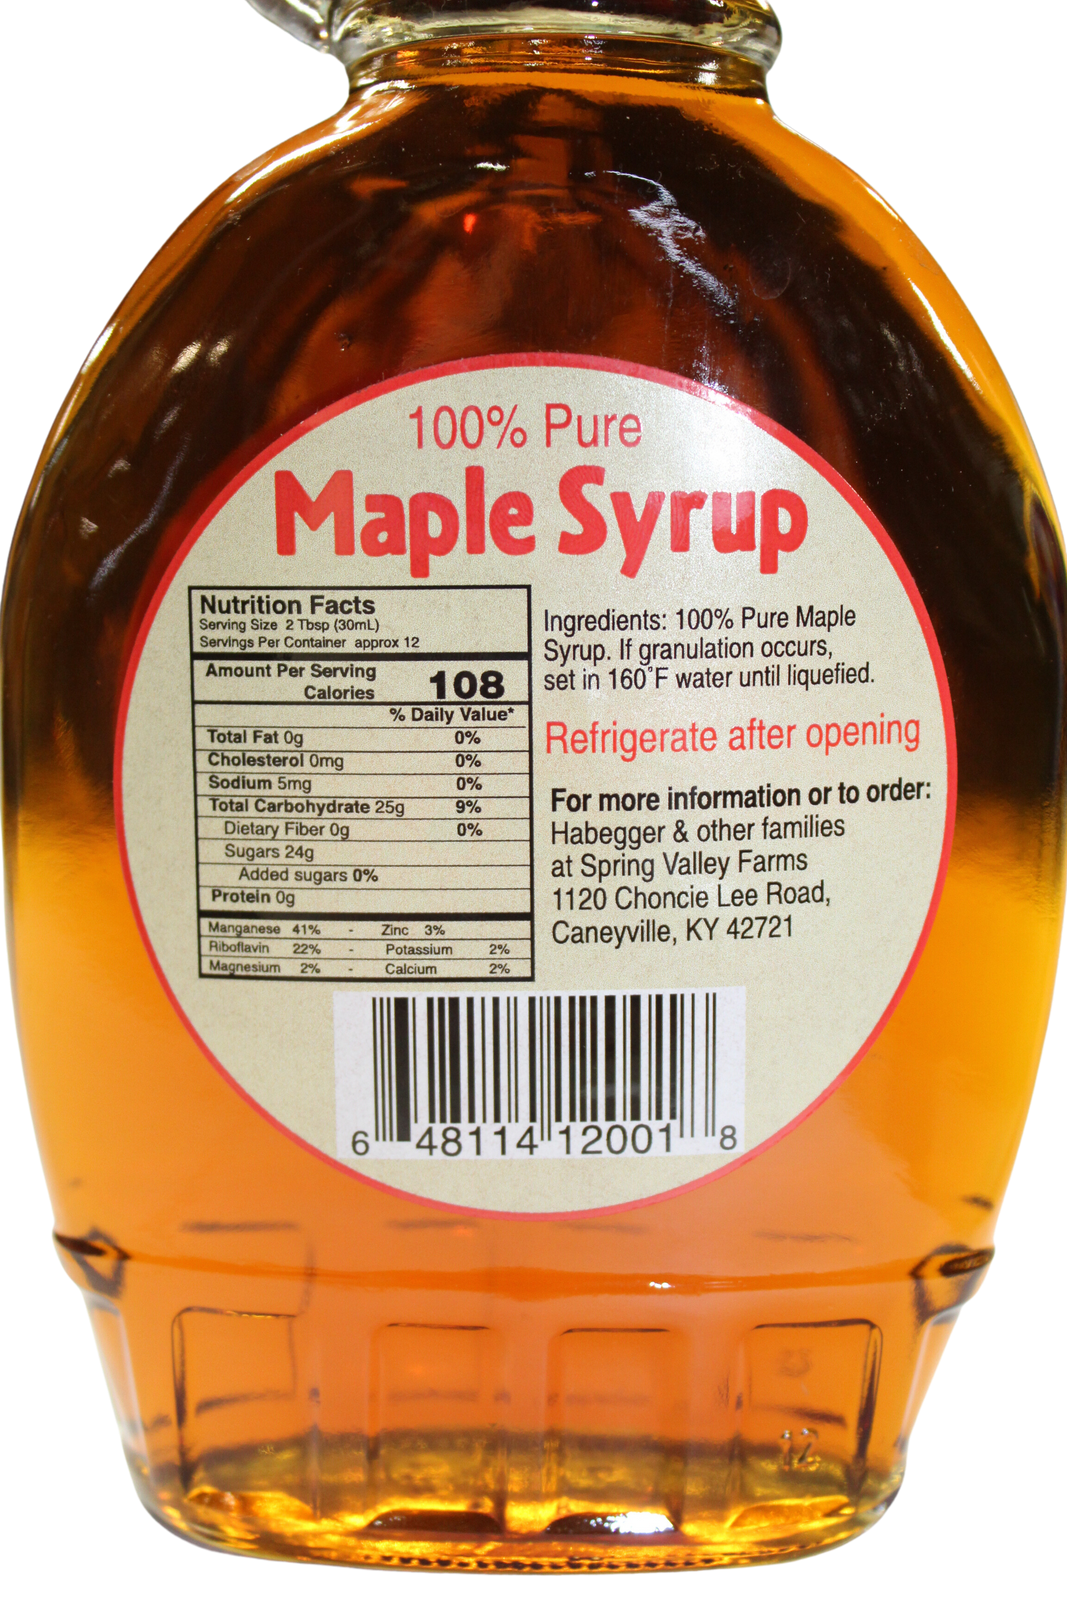 Spring Valley Farms 100% Pure Maple Syrup